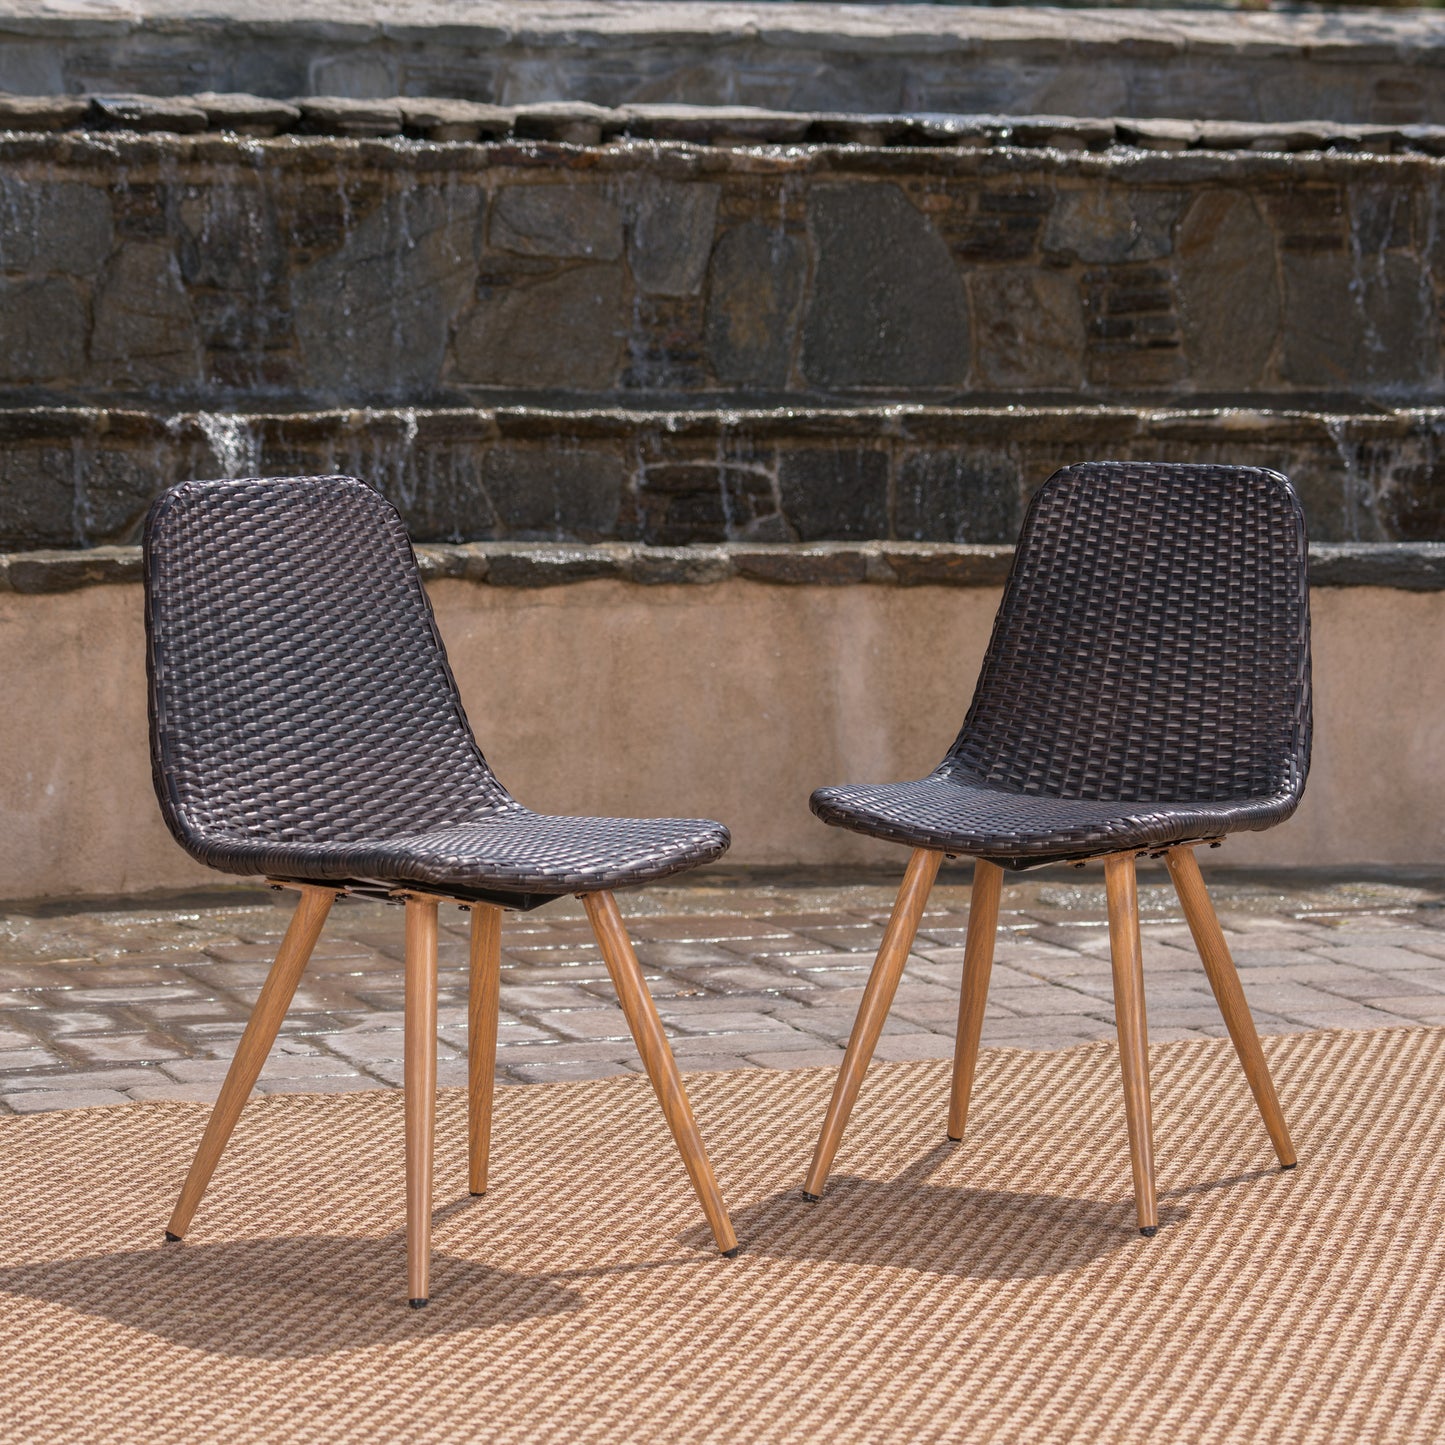 Gilda Outdoor Multi-Brown Wicker Dining Chairs With Wood Finished Metal Legs